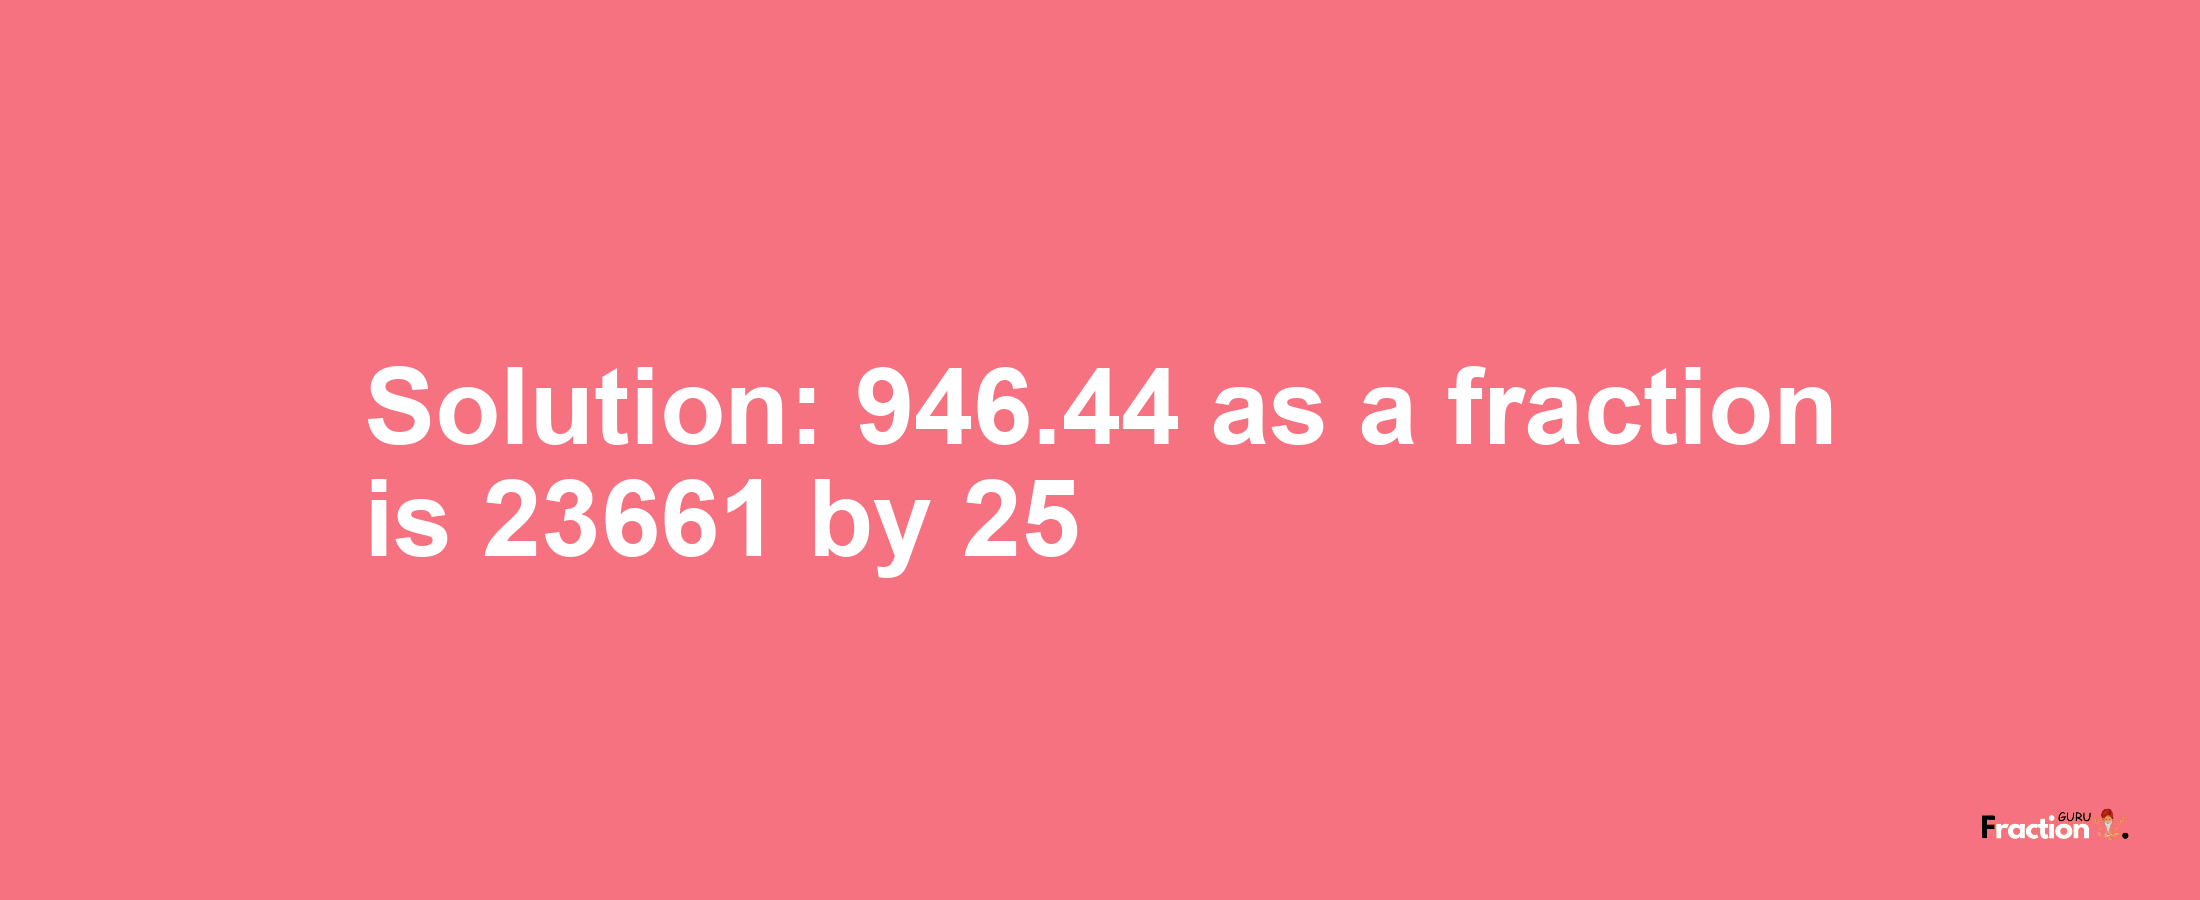 Solution:946.44 as a fraction is 23661/25